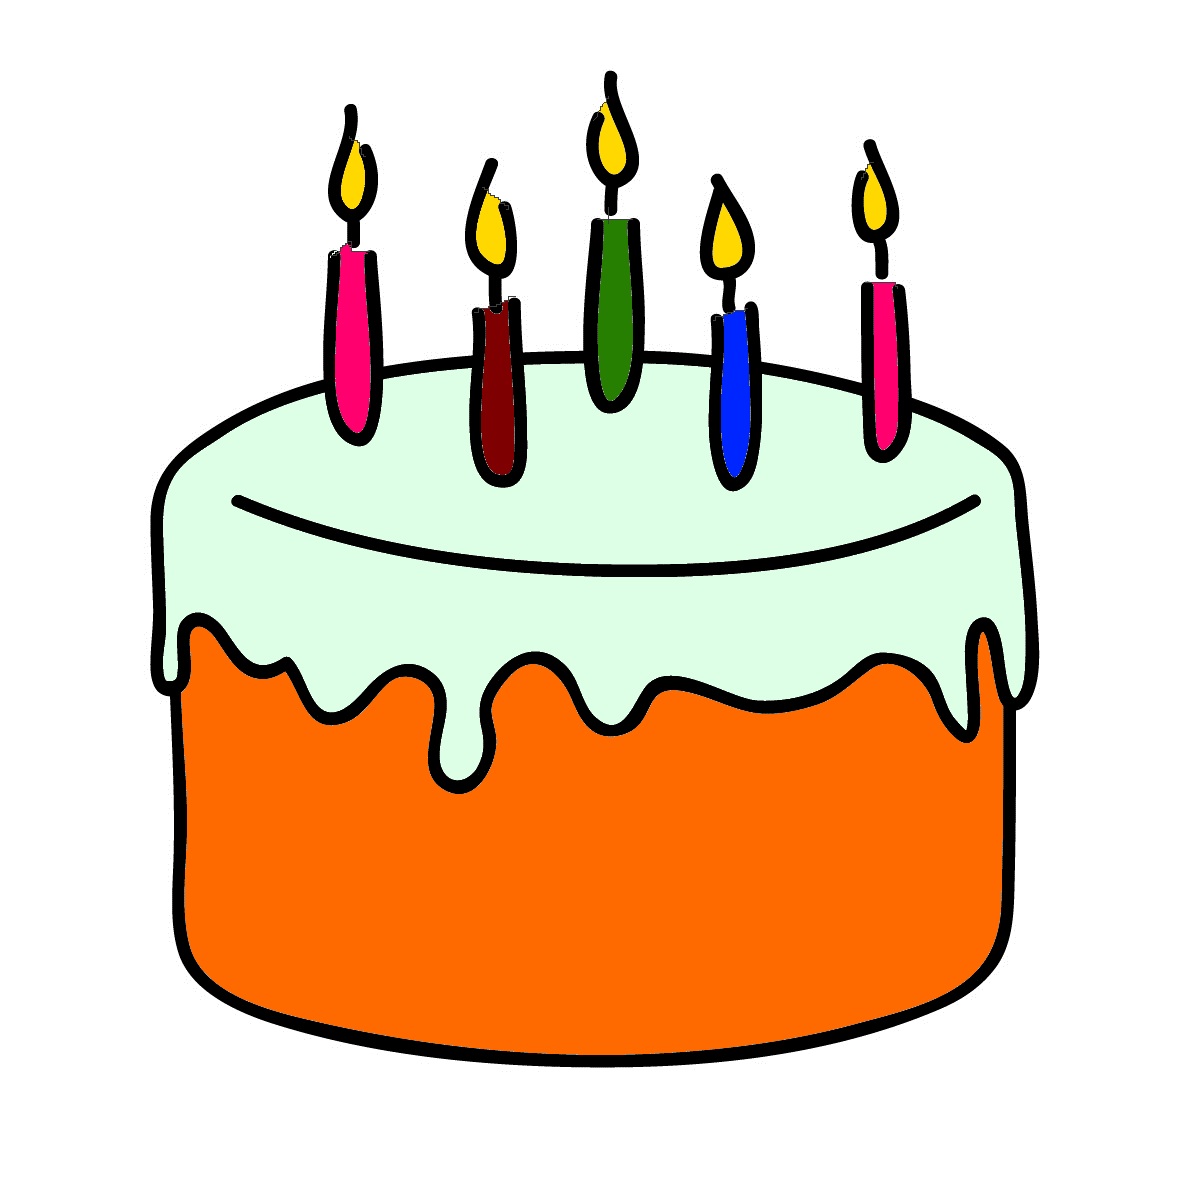 Free Birthday Cake Clipart Download Free Clip Art Free Clip Art On Clipart Library